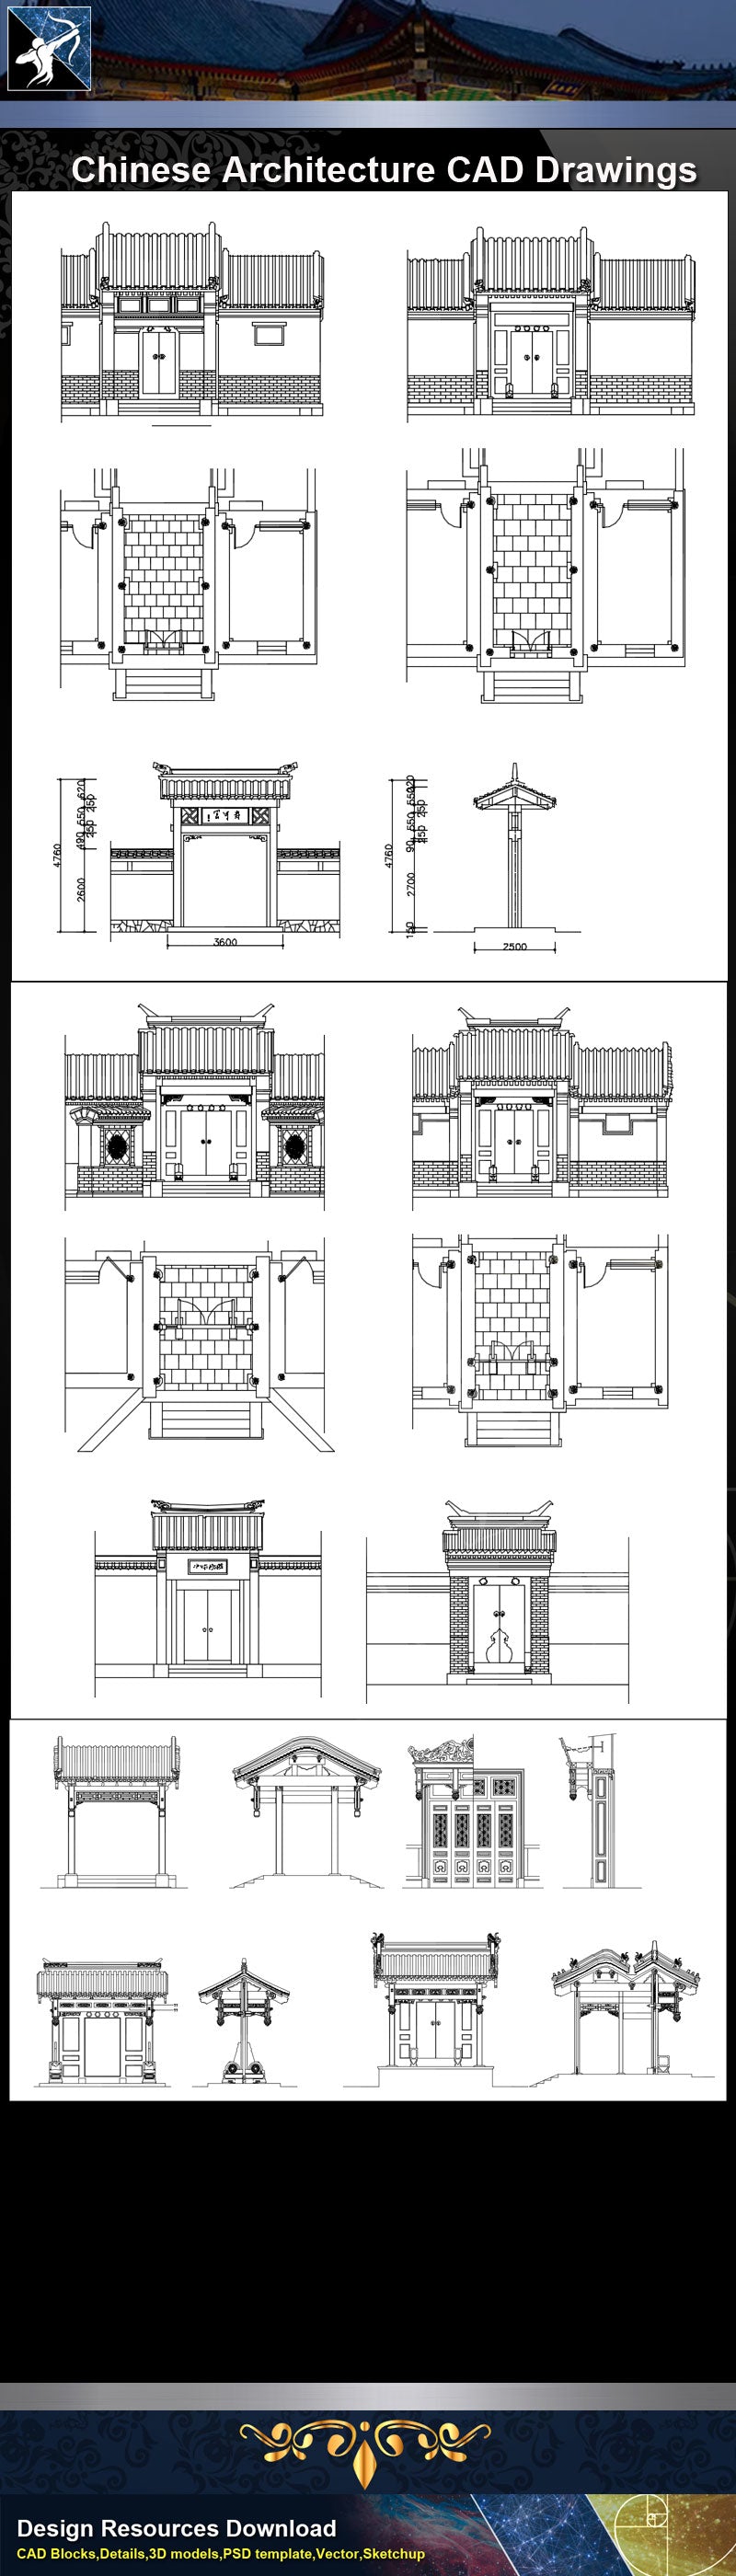 ★Chinese Architecture CAD Drawings-Chinese Gate,Door Design